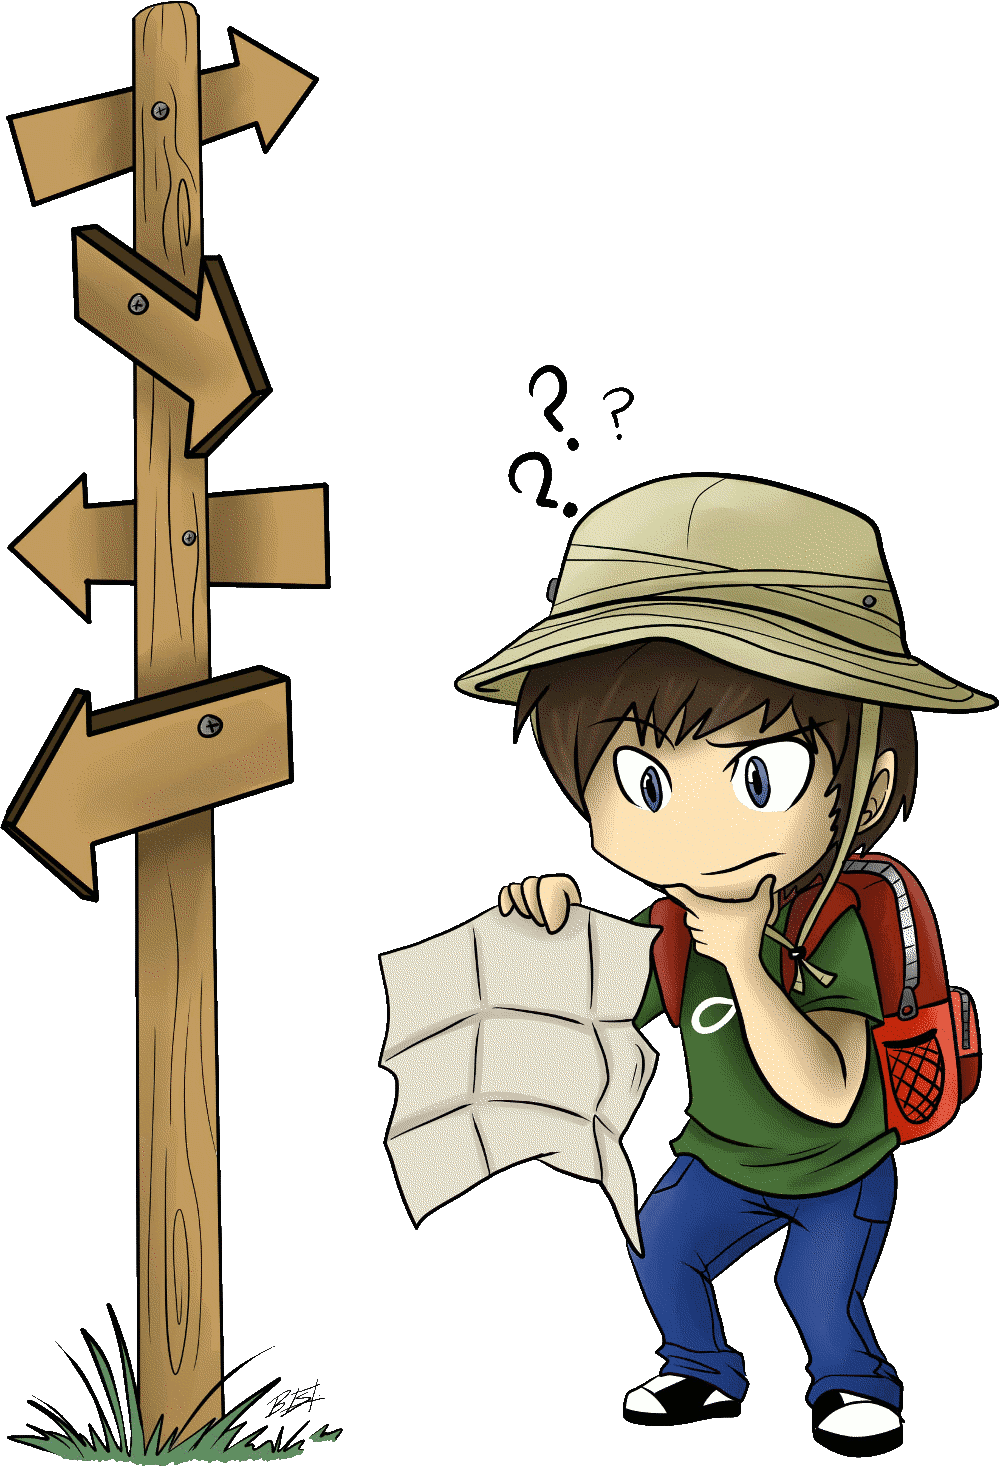 Illustration of man standing in front of signpost, holding a map and looking confused